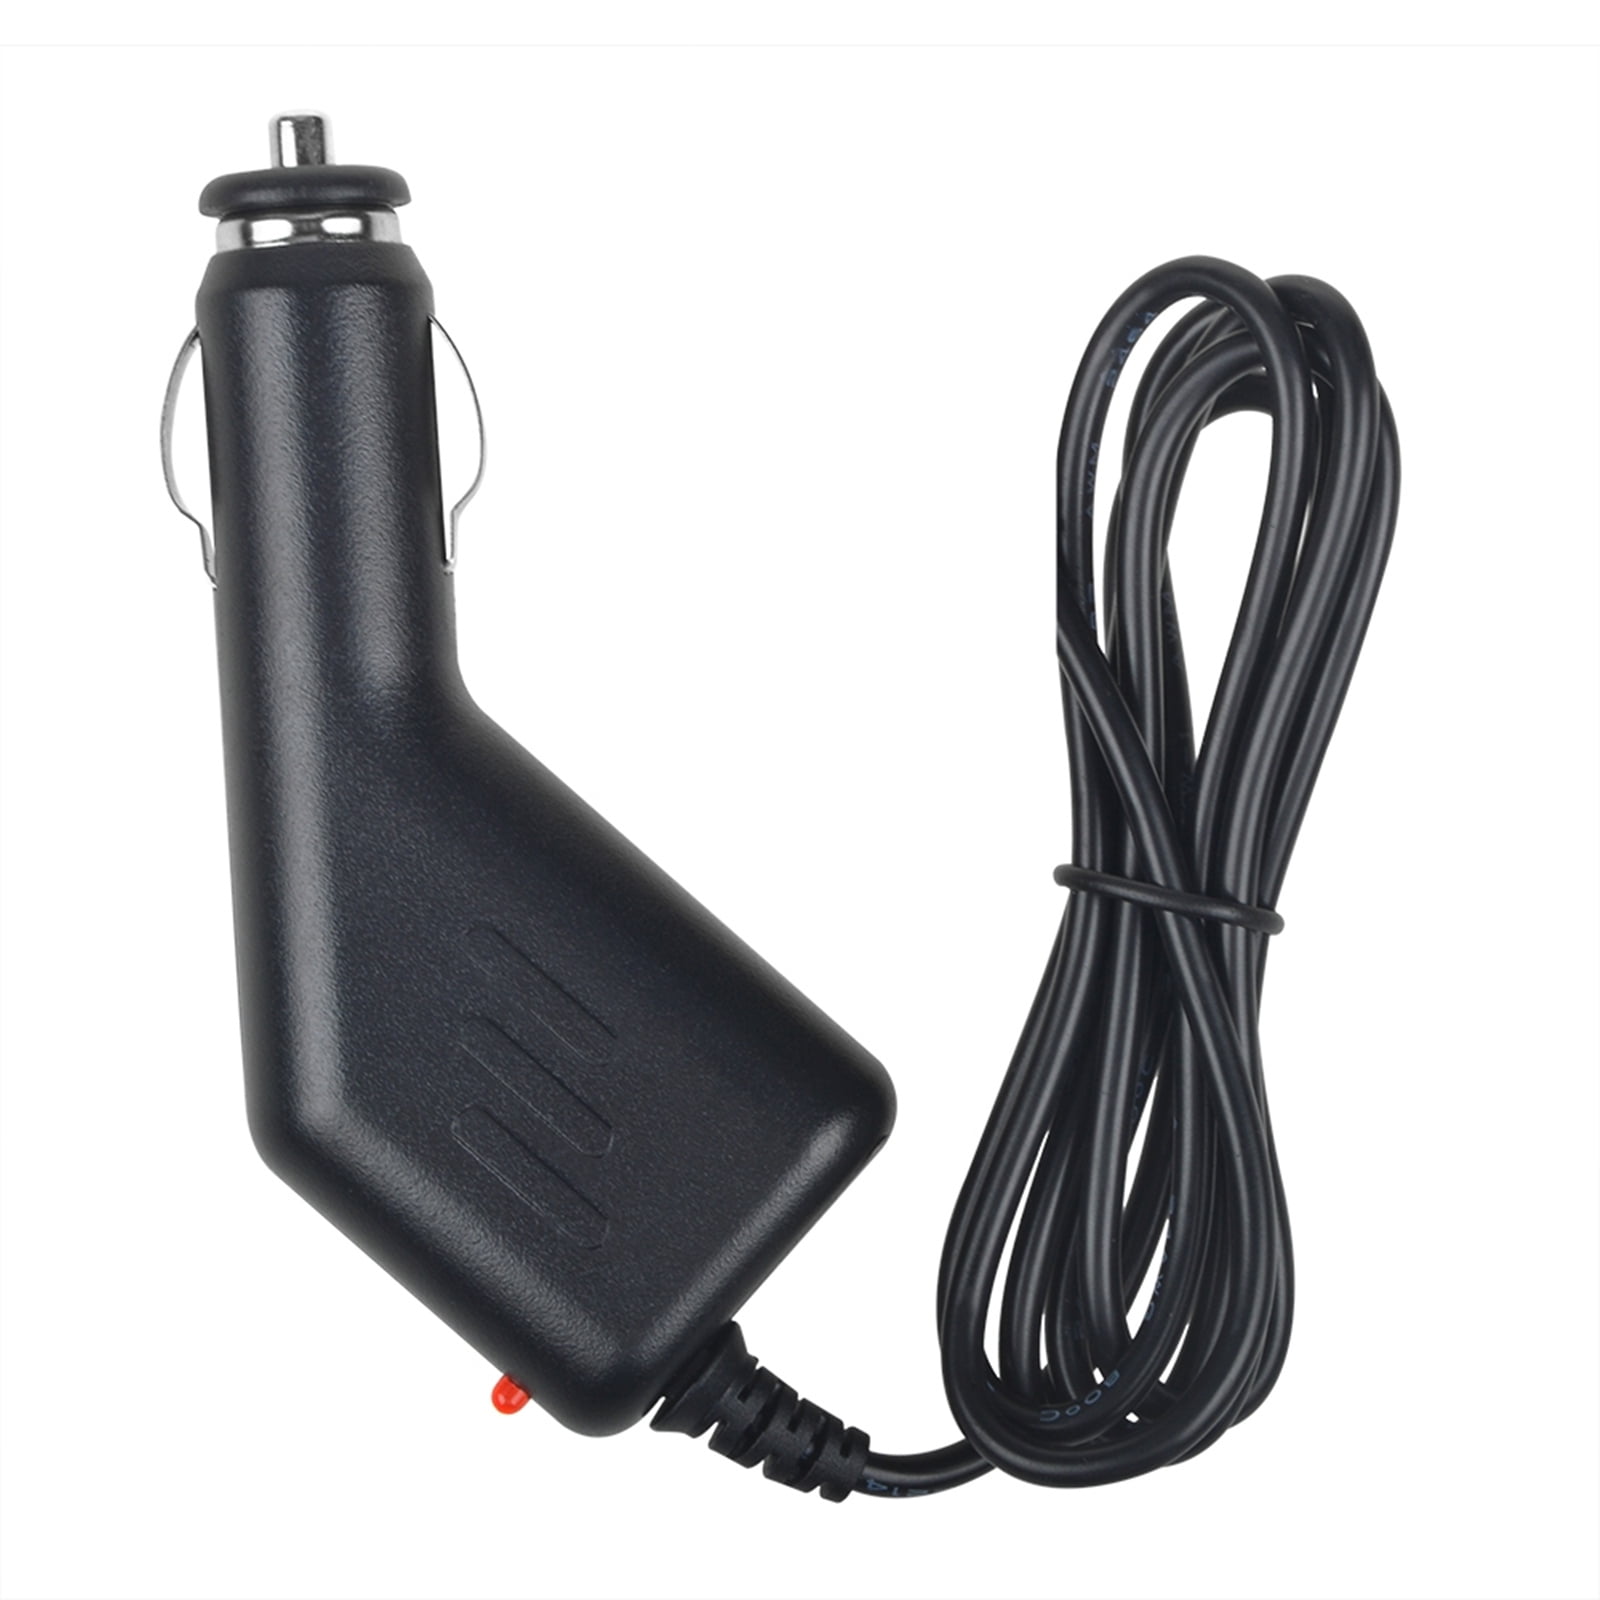 USB DC Power Adapter Charger Cable Cord for Sirius XM OnyX Radio Dock 